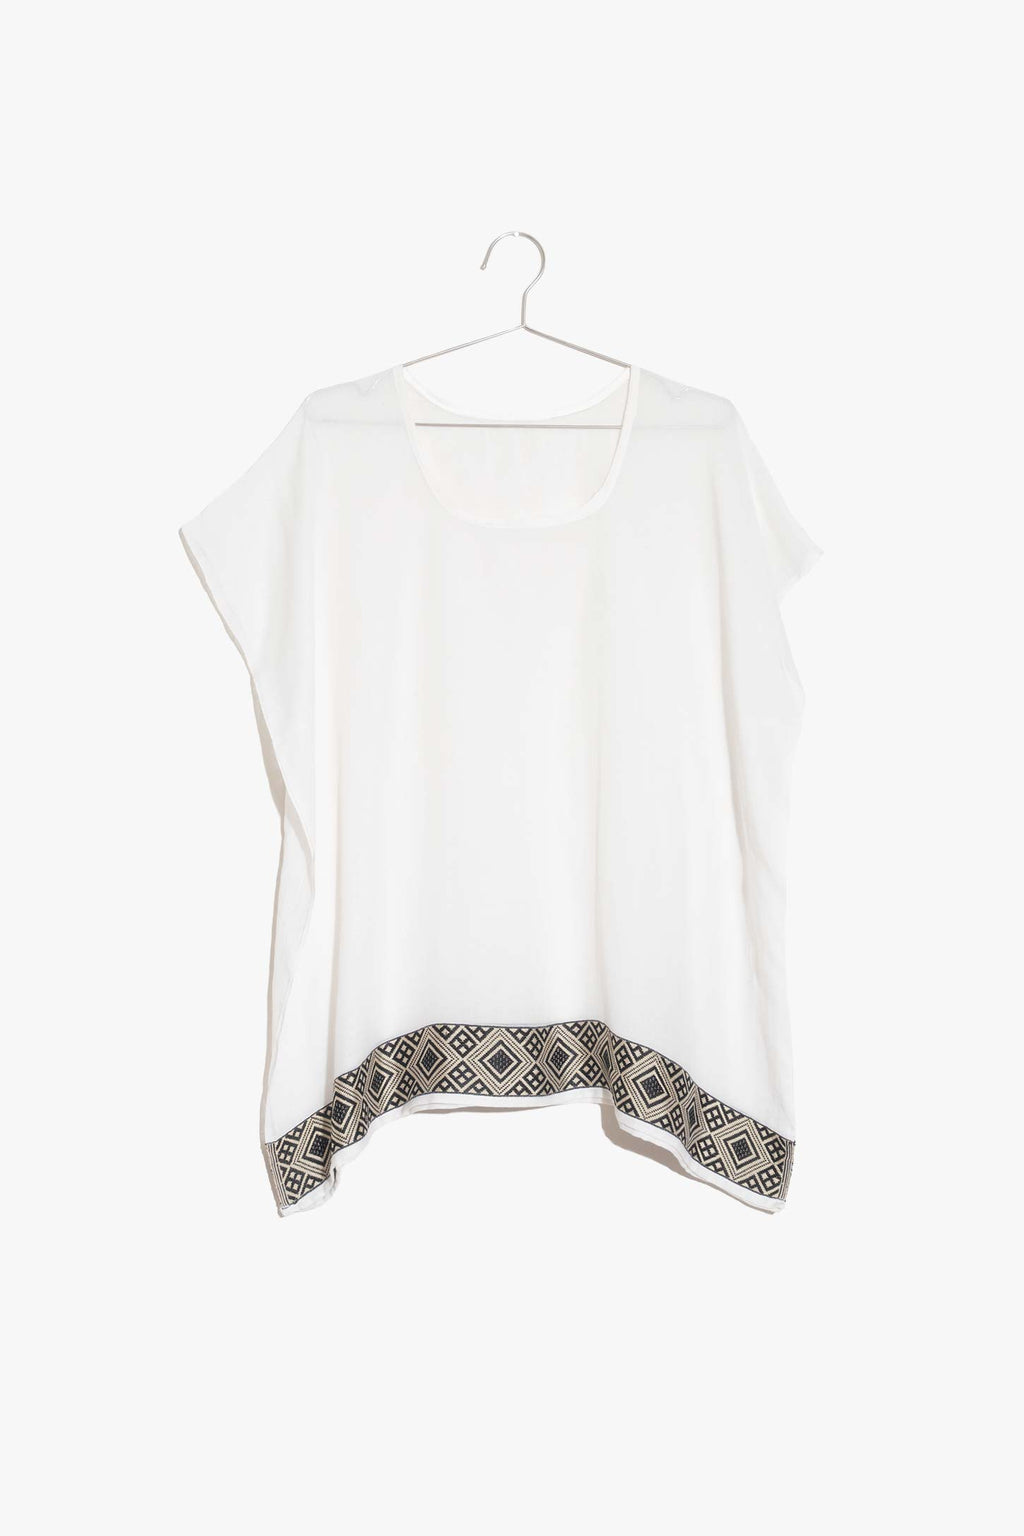 The Lulu Top is like your oversized tee but better. This semi-sheer cotton top is comfy without sacrificing style. It features a rich pattern along the bottom hem, inspired by Ethiopian textile design